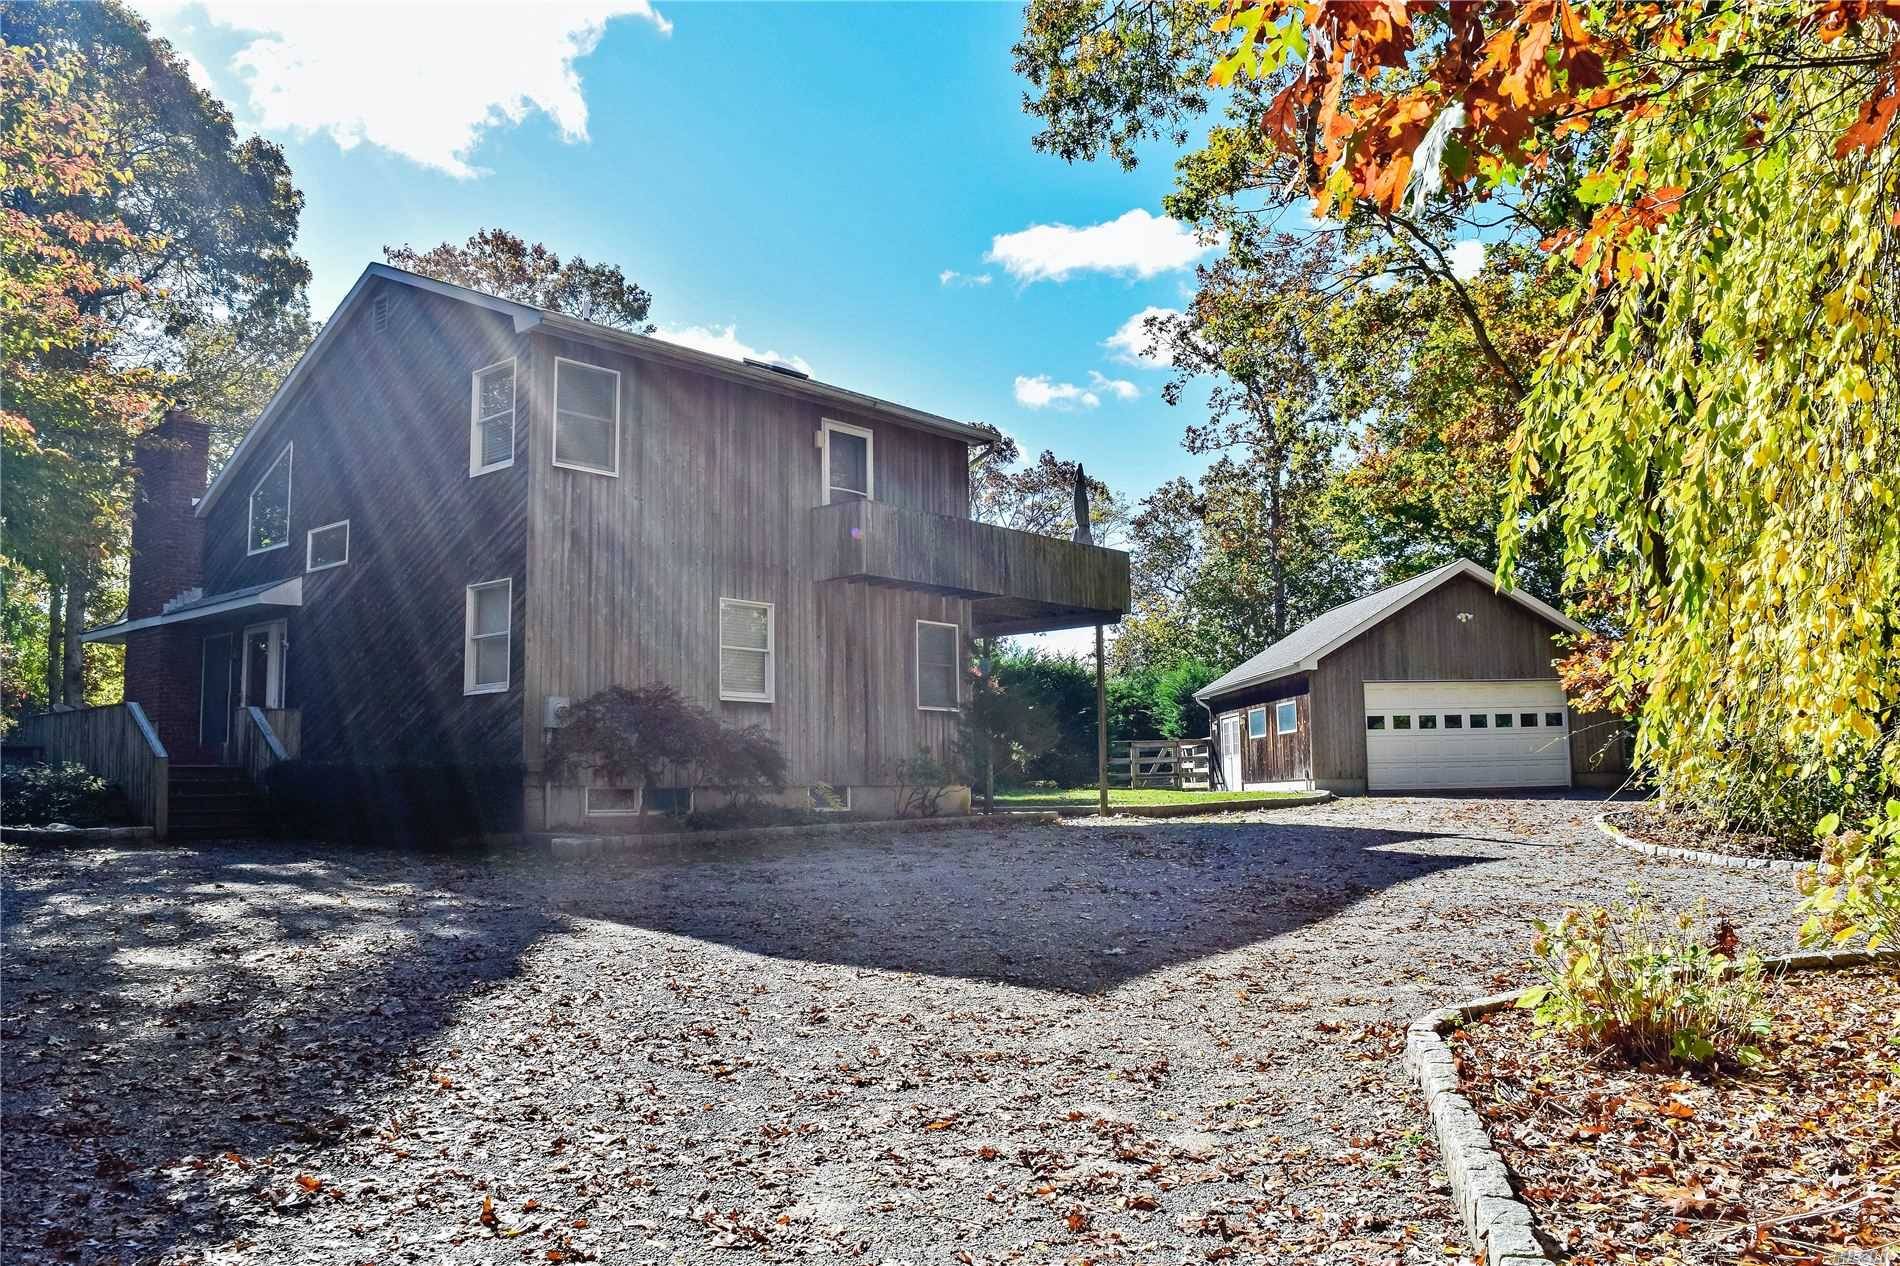 Set on 1. 1 acres down in a private flag lot, sits a well maintained 3 bedroom 2 bath contemporary saltbox featuring high ceilings, wood floors throughout, a wood burning ...